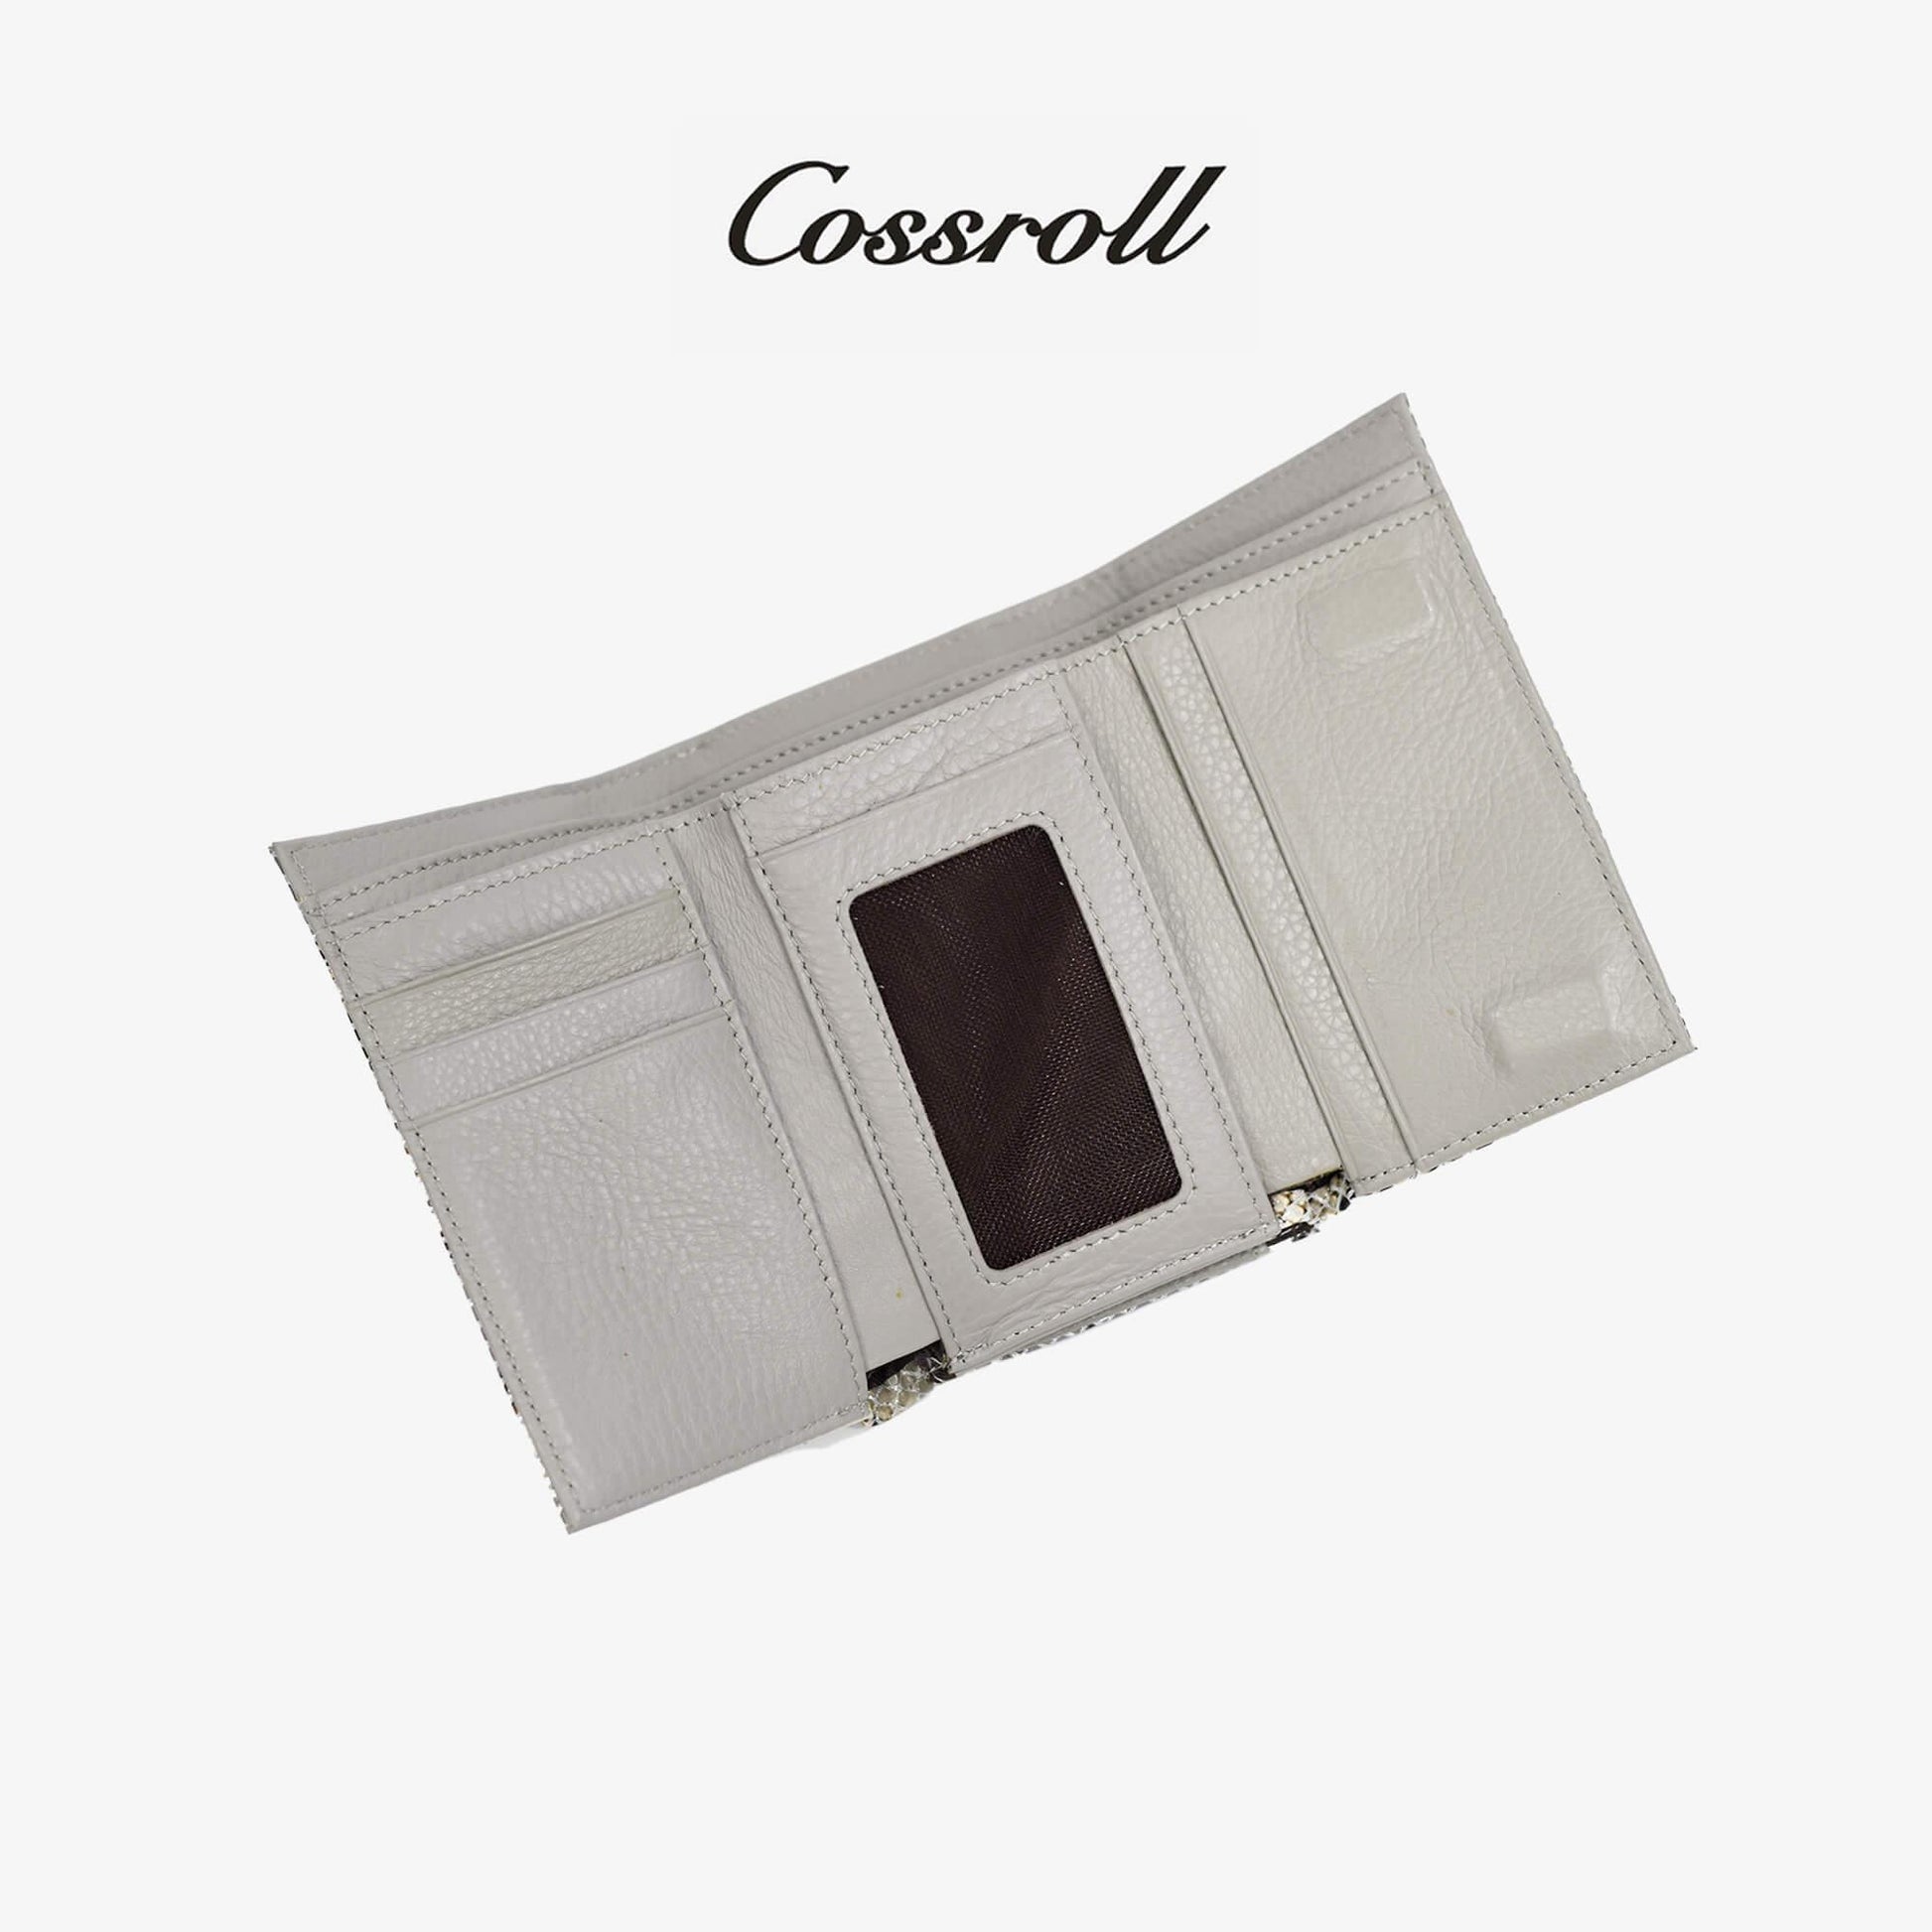 Genuine Leather Women Wallet Manufacturer  - cossroll.leather